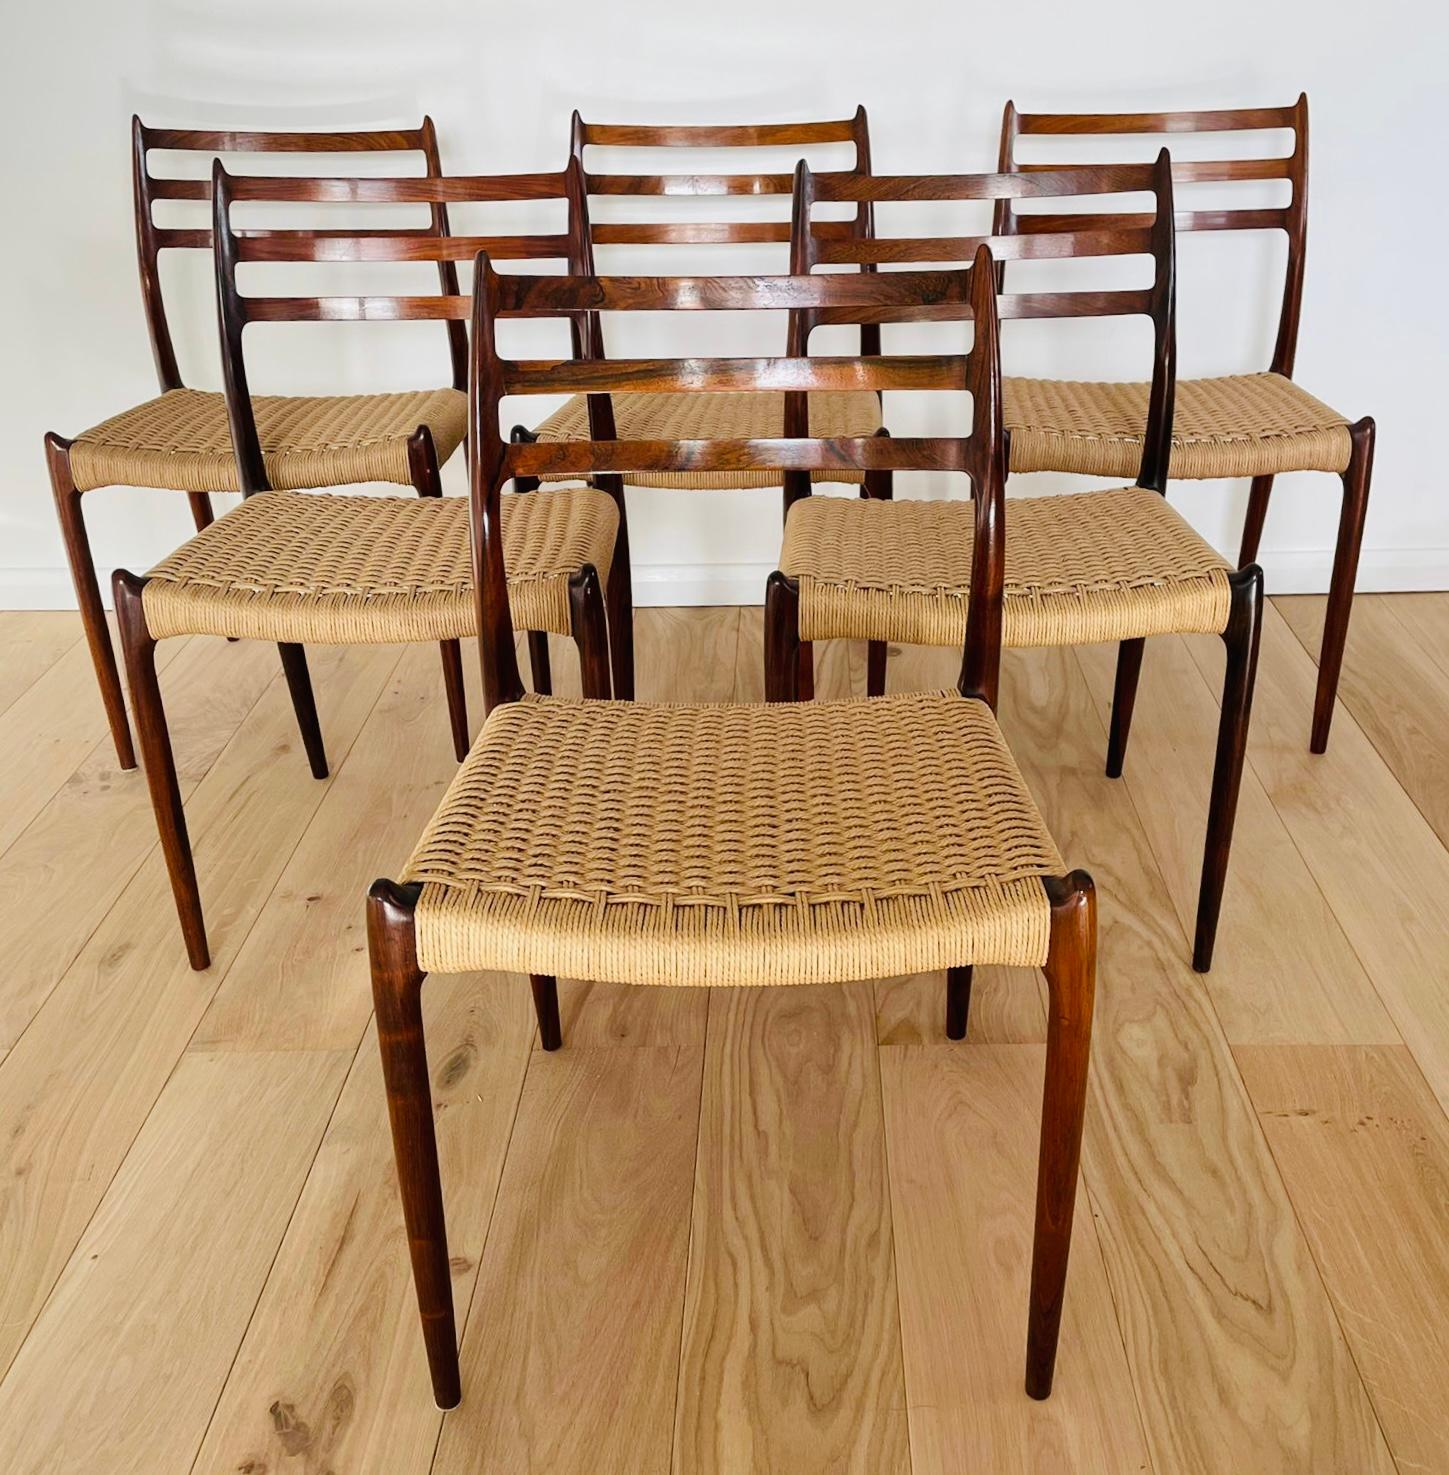 Set of 6 1960s Danish solid Rosewood dining chairs designed by Niels Otto Møller. Manufactured by J. L. Møllers Mobelfabrik, Denmark in 1962. Model 78. These organically shaped chairs are all from early production and all feature the makers